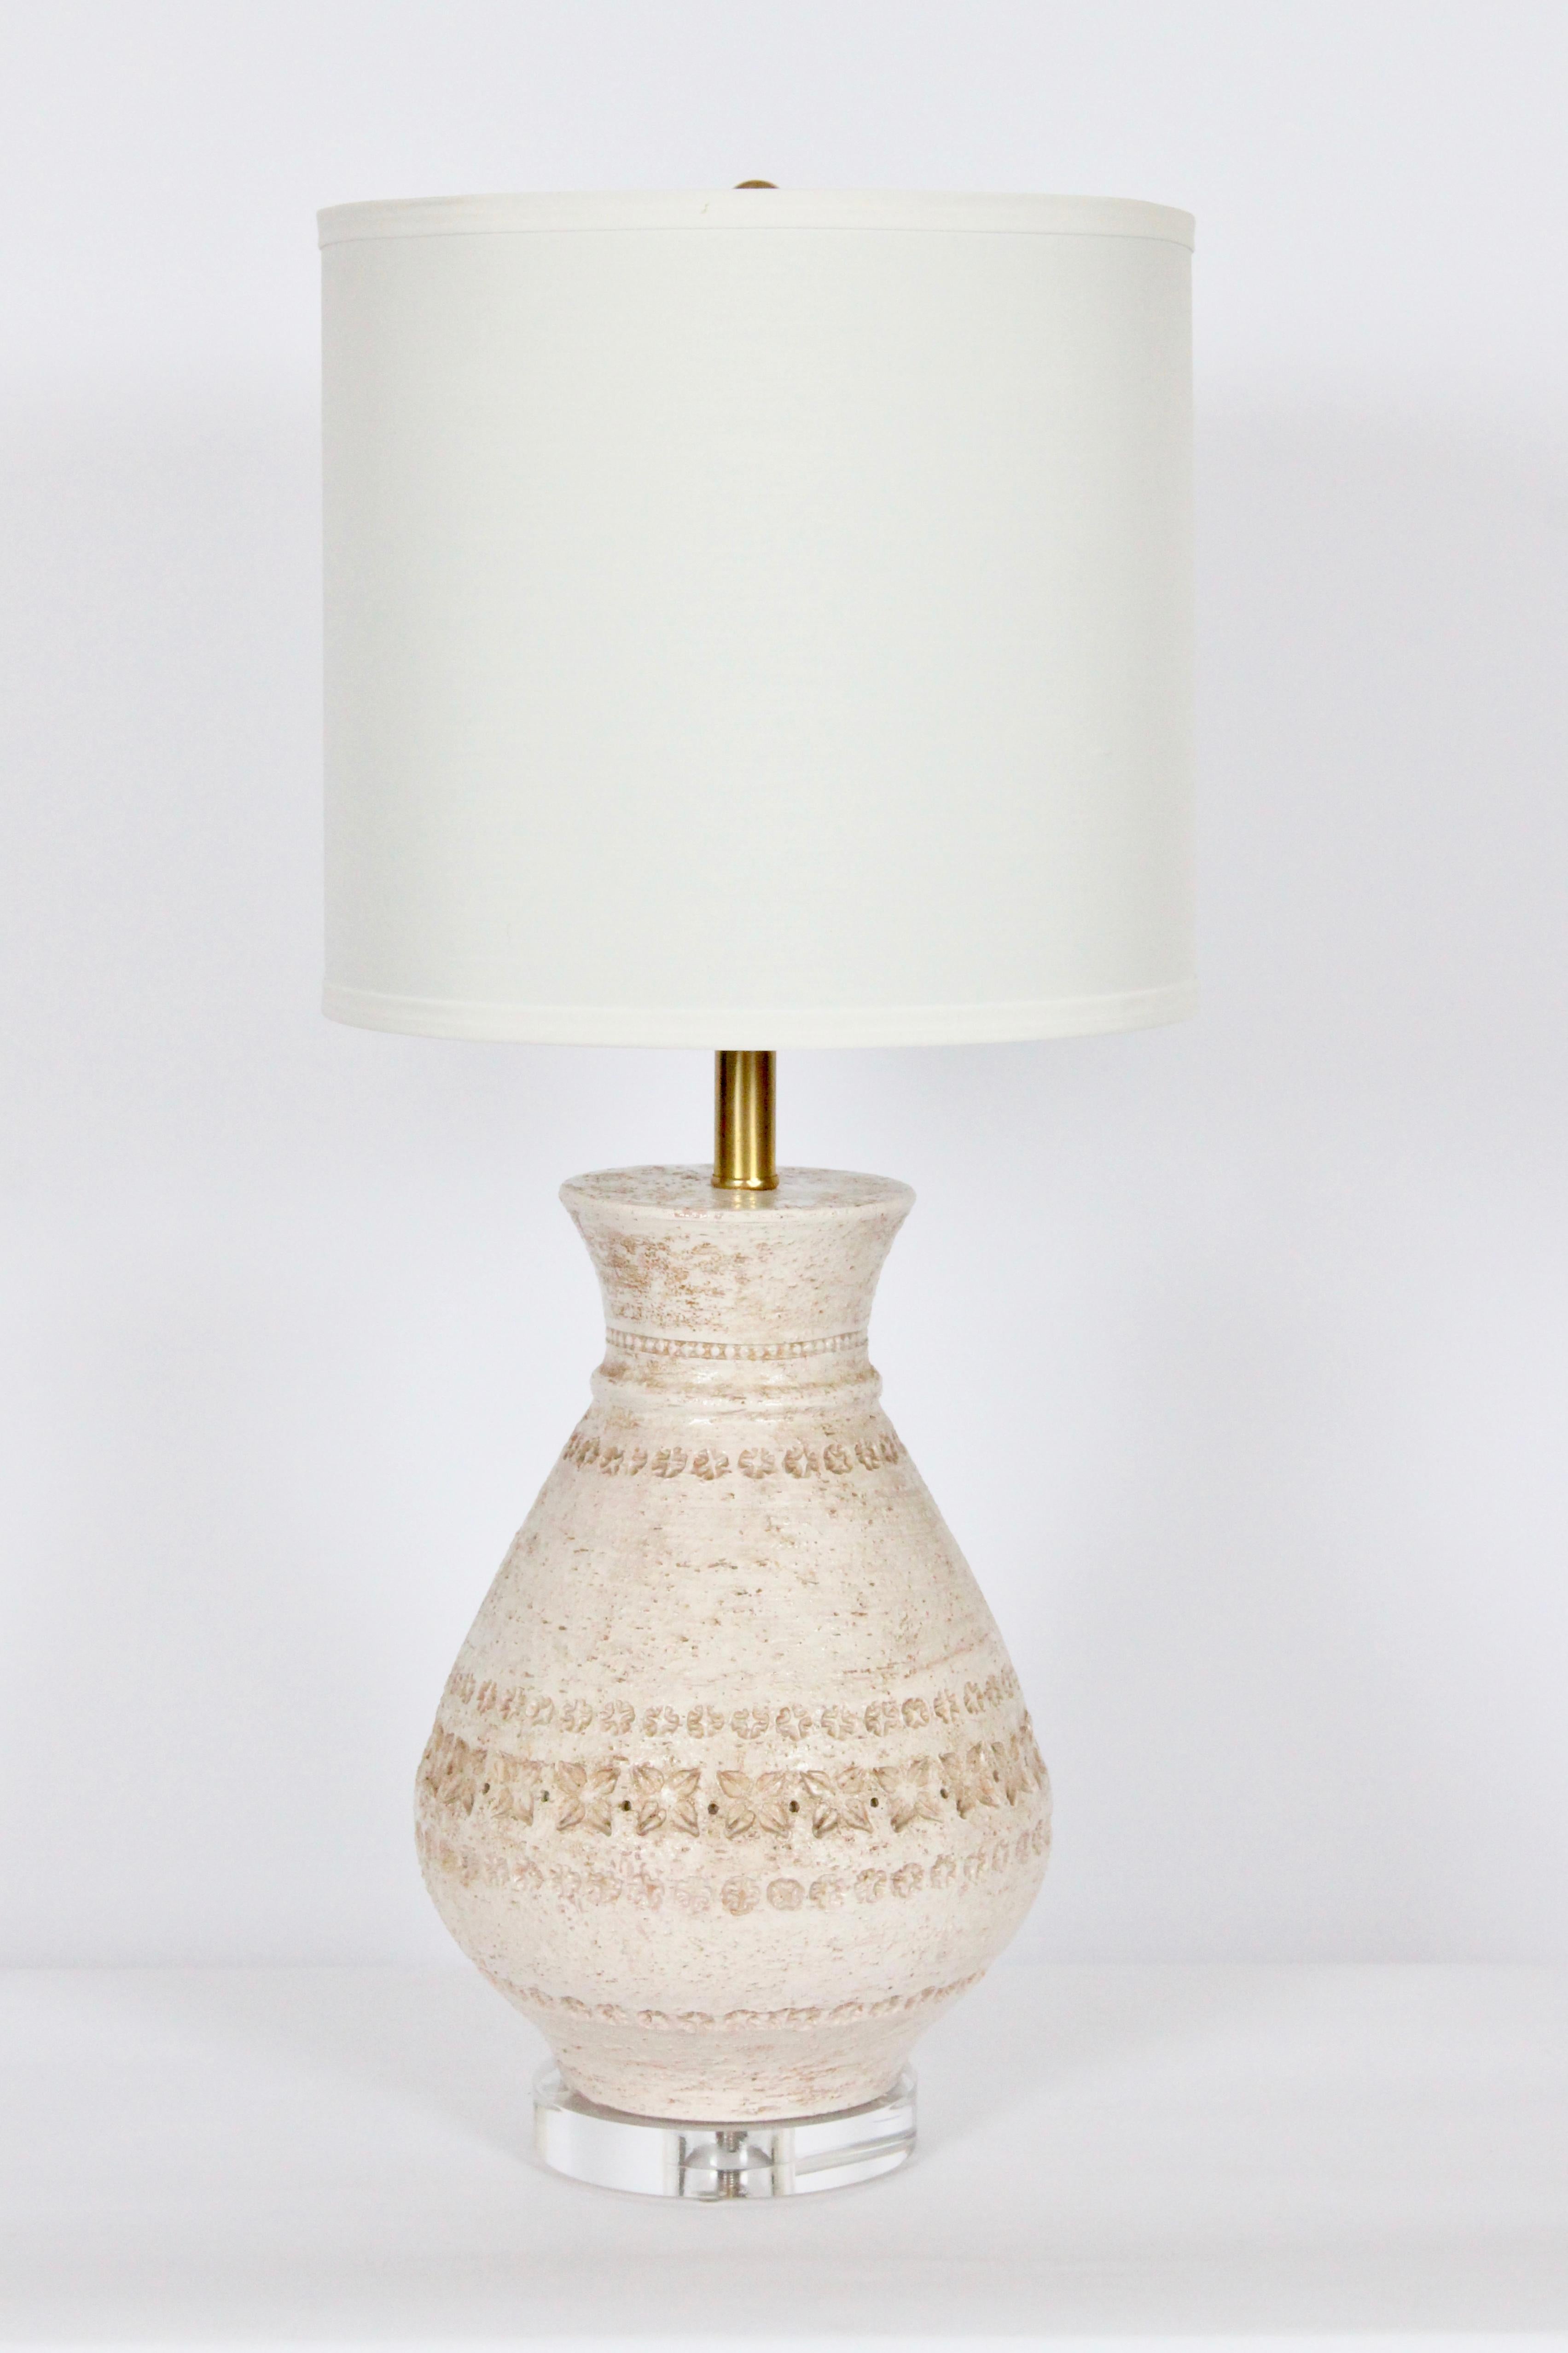 Aldo Londi for Bitossi Imprinted Cream and Off White Glazed Pottery Table Lamp For Sale 2